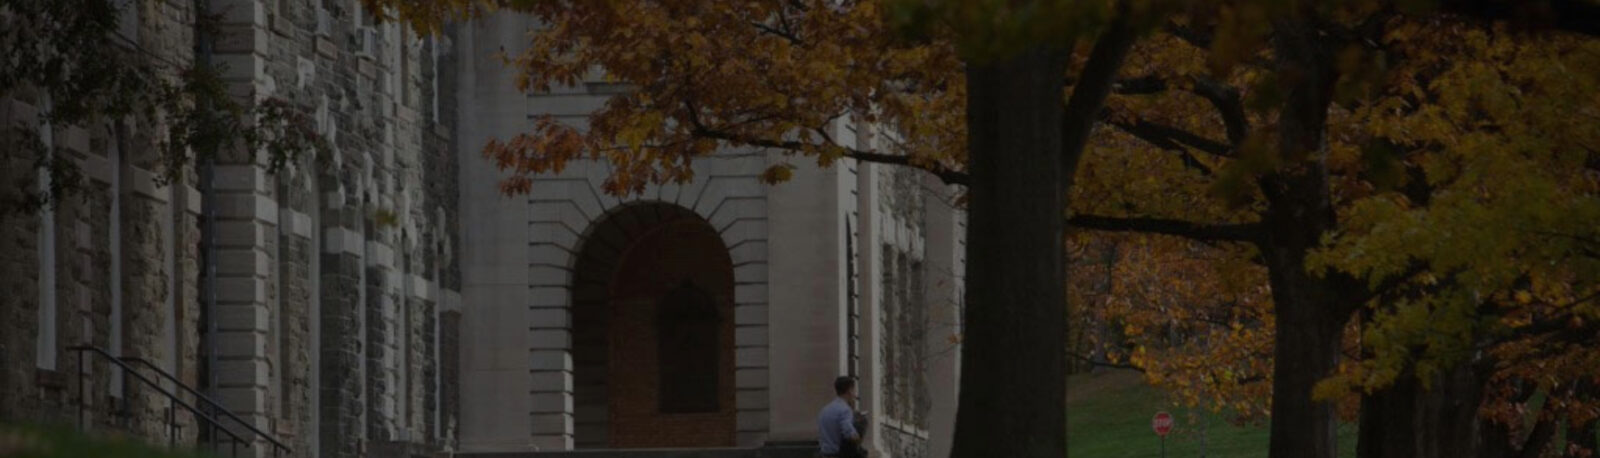 Man walking in front of a building on Cornell's campus in the fall.